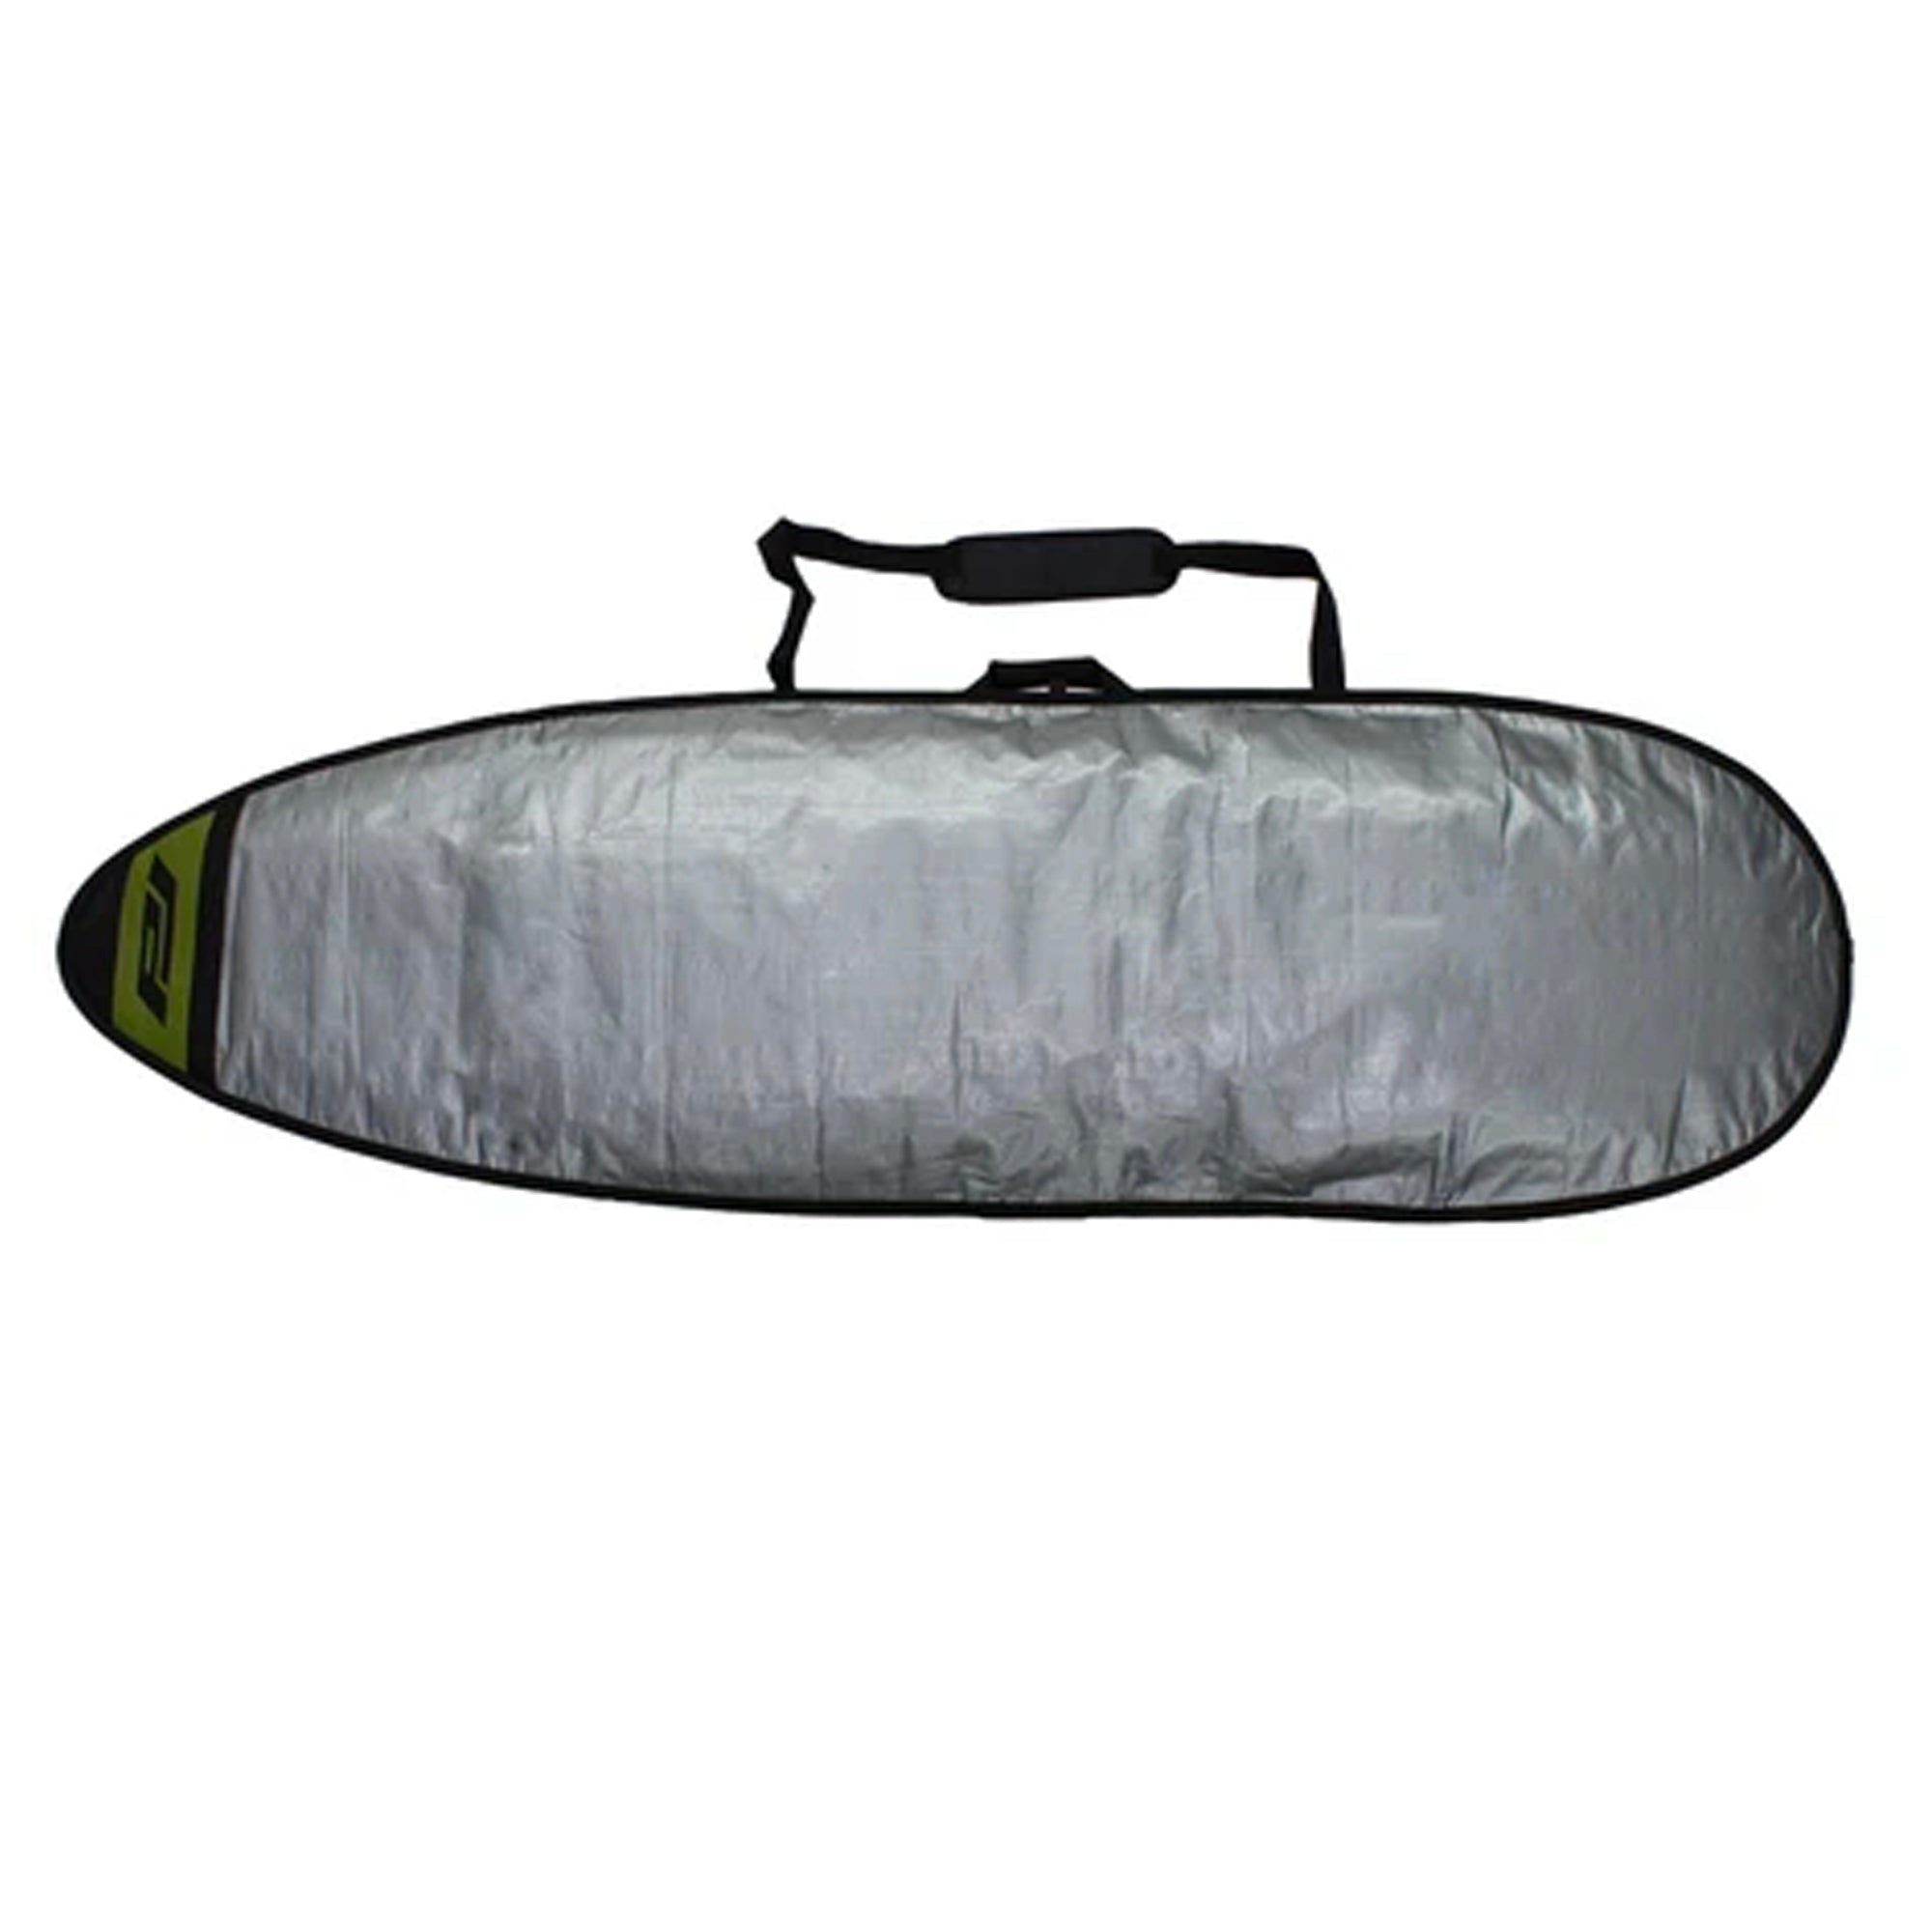 Pro-Lite Resession Day Shortboard Surfboard Bag